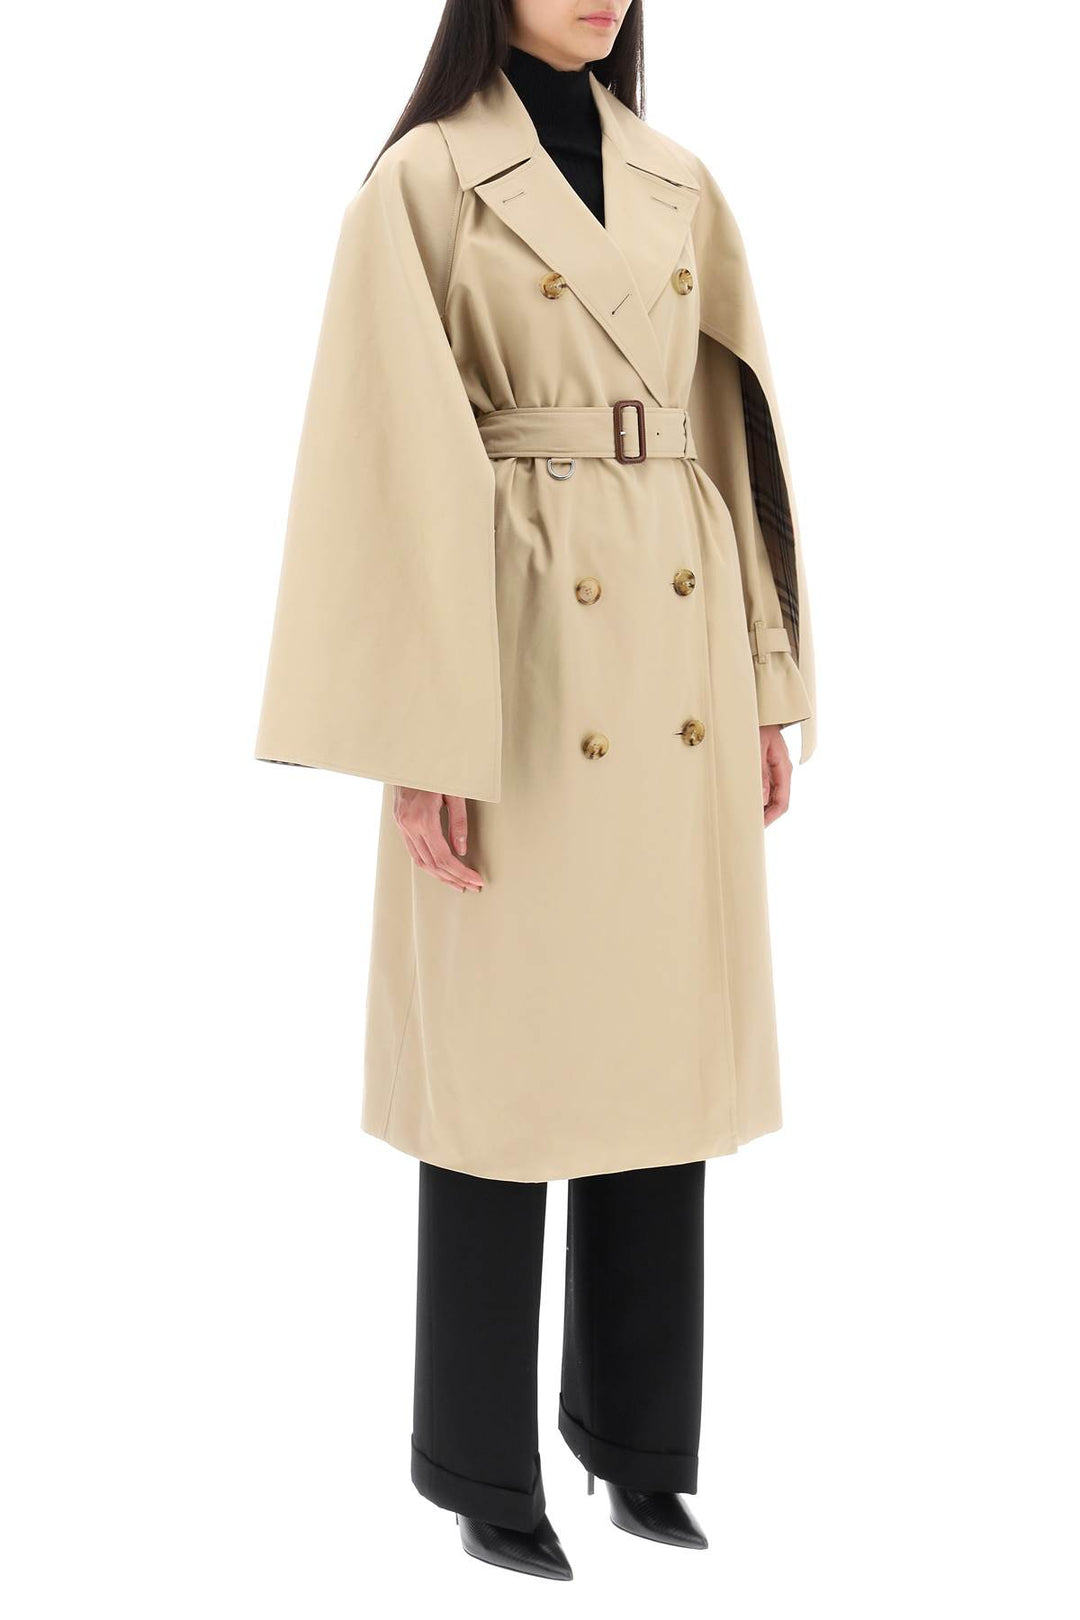 Burberry 'Ness' Double Breasted Raincoat In Cotton Gabardine   Beige